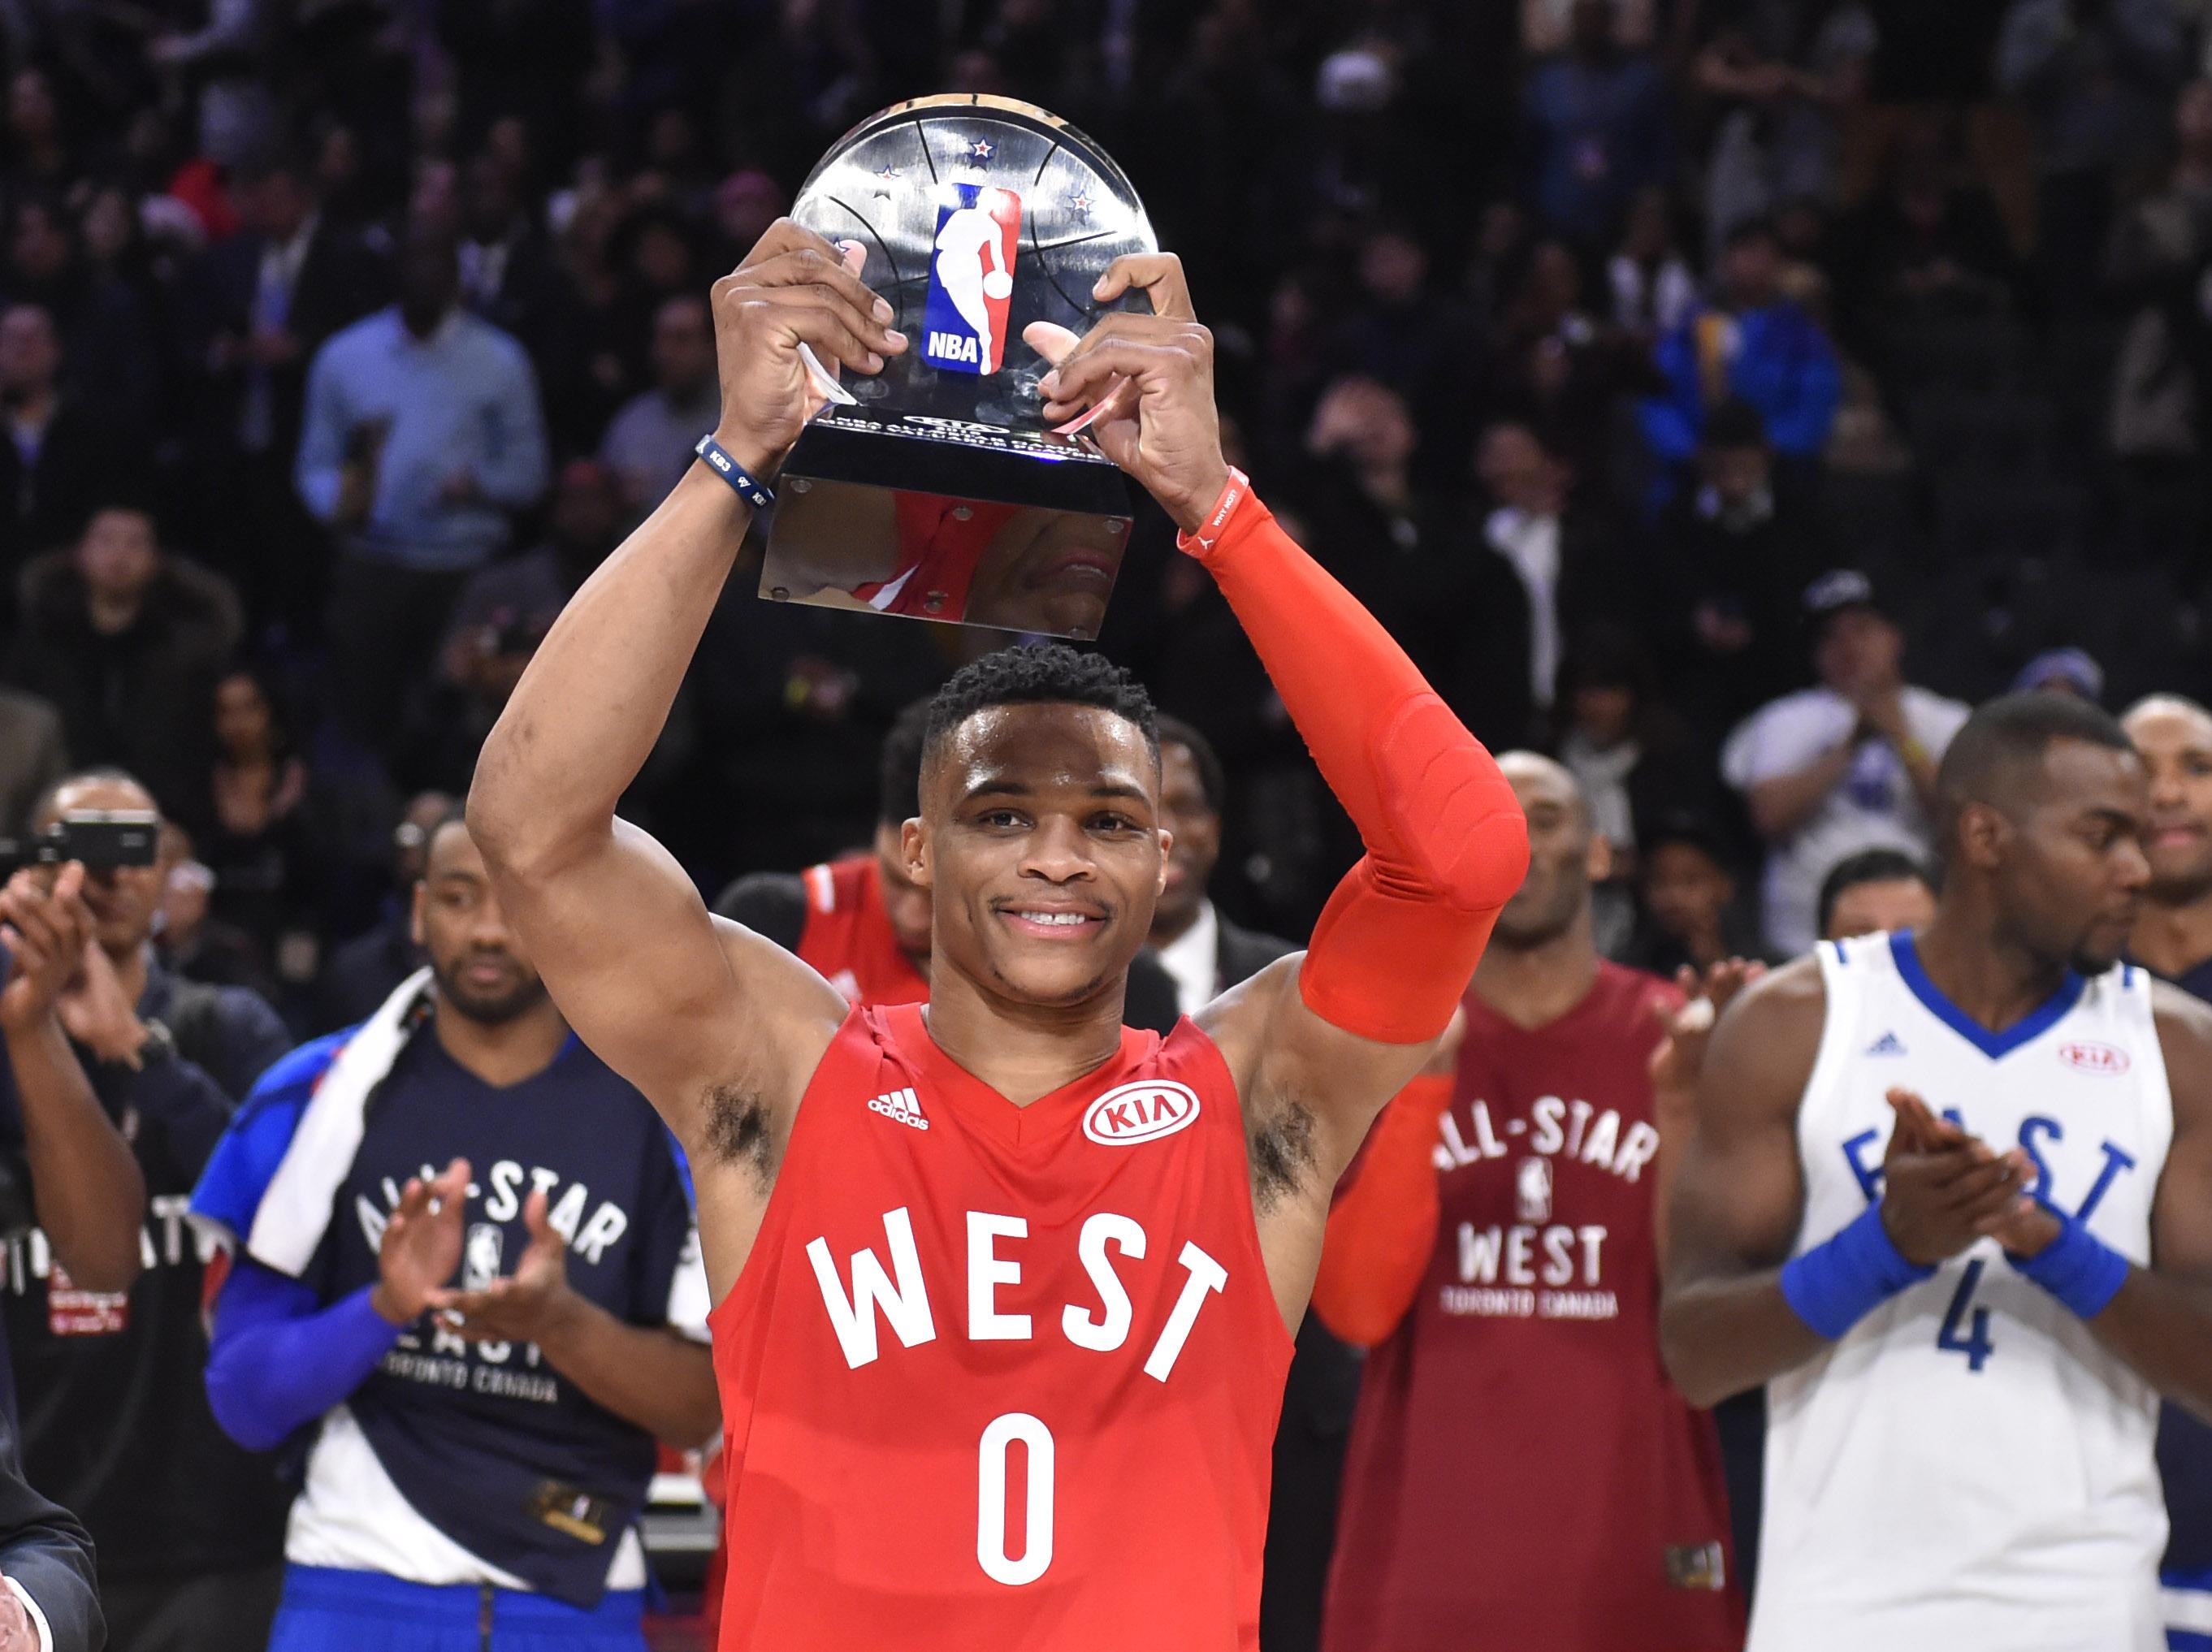 russell westbrook all star game jersey